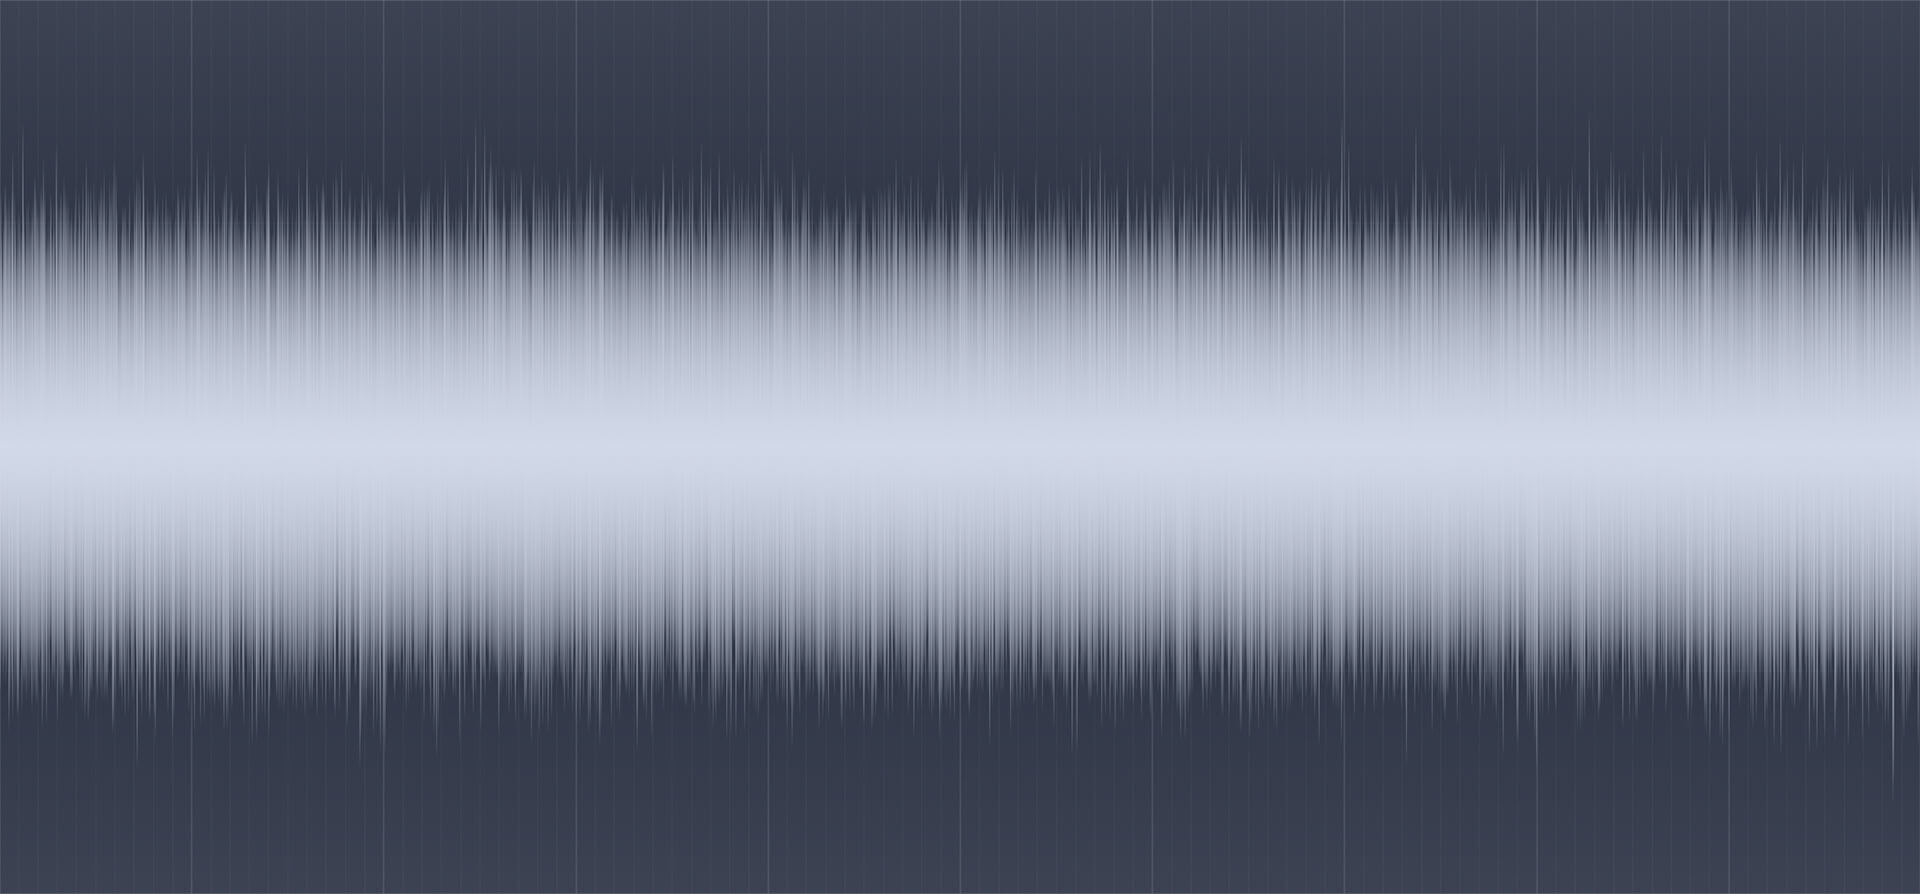 A zoomed out waveform of a sound in a timeline.